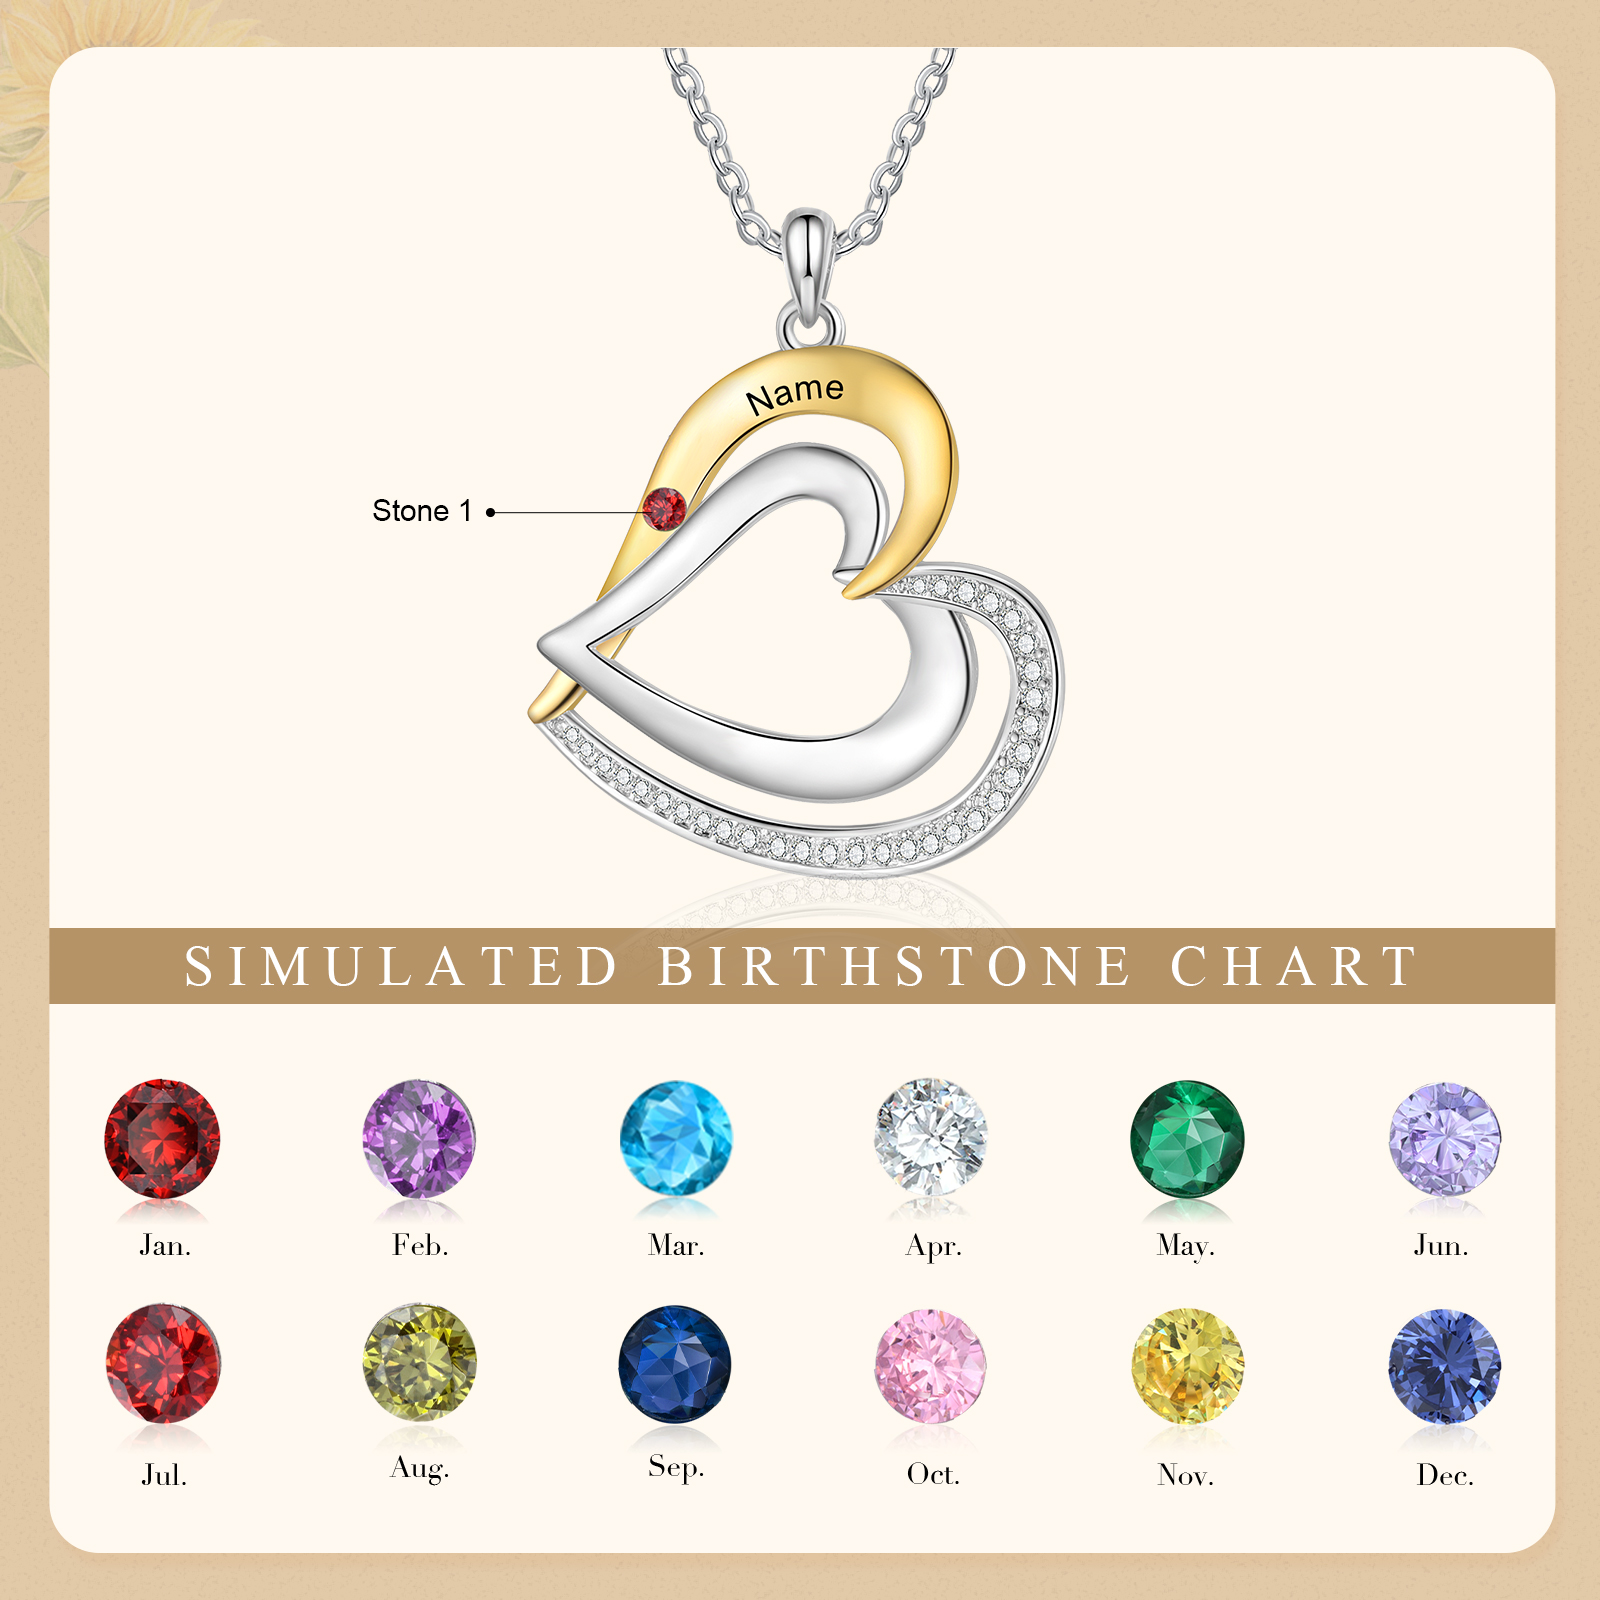 1 Name - Personalized Special Heart Necklace S925 Silver with Birthstone and Name Beautiful Gift for Her